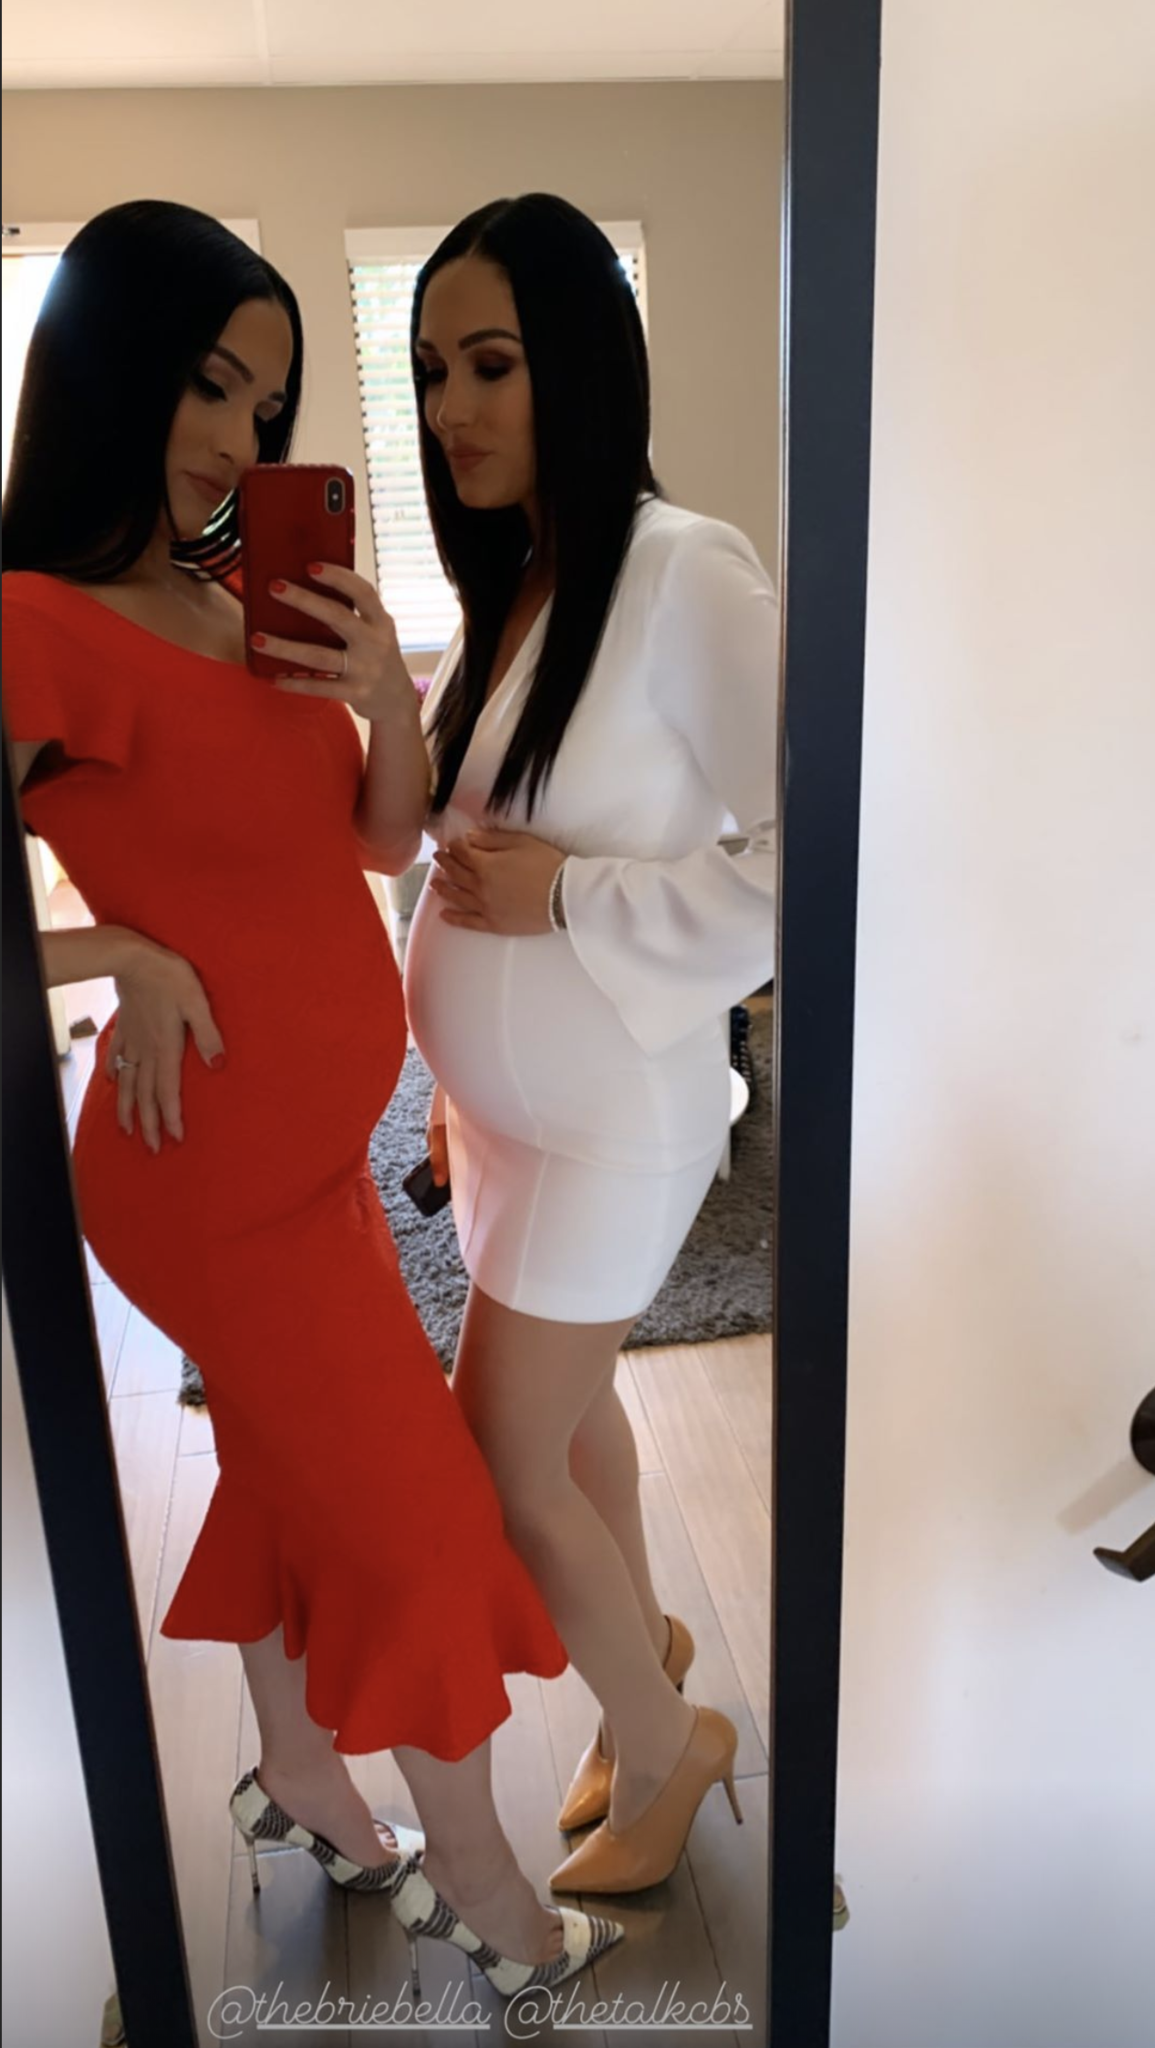 Twins Nikki and Brie Bella show off their growing baby bumps with a sweet mirror selfie on Instagram. The two former WWE wrestlers are due within two weeks of each other.